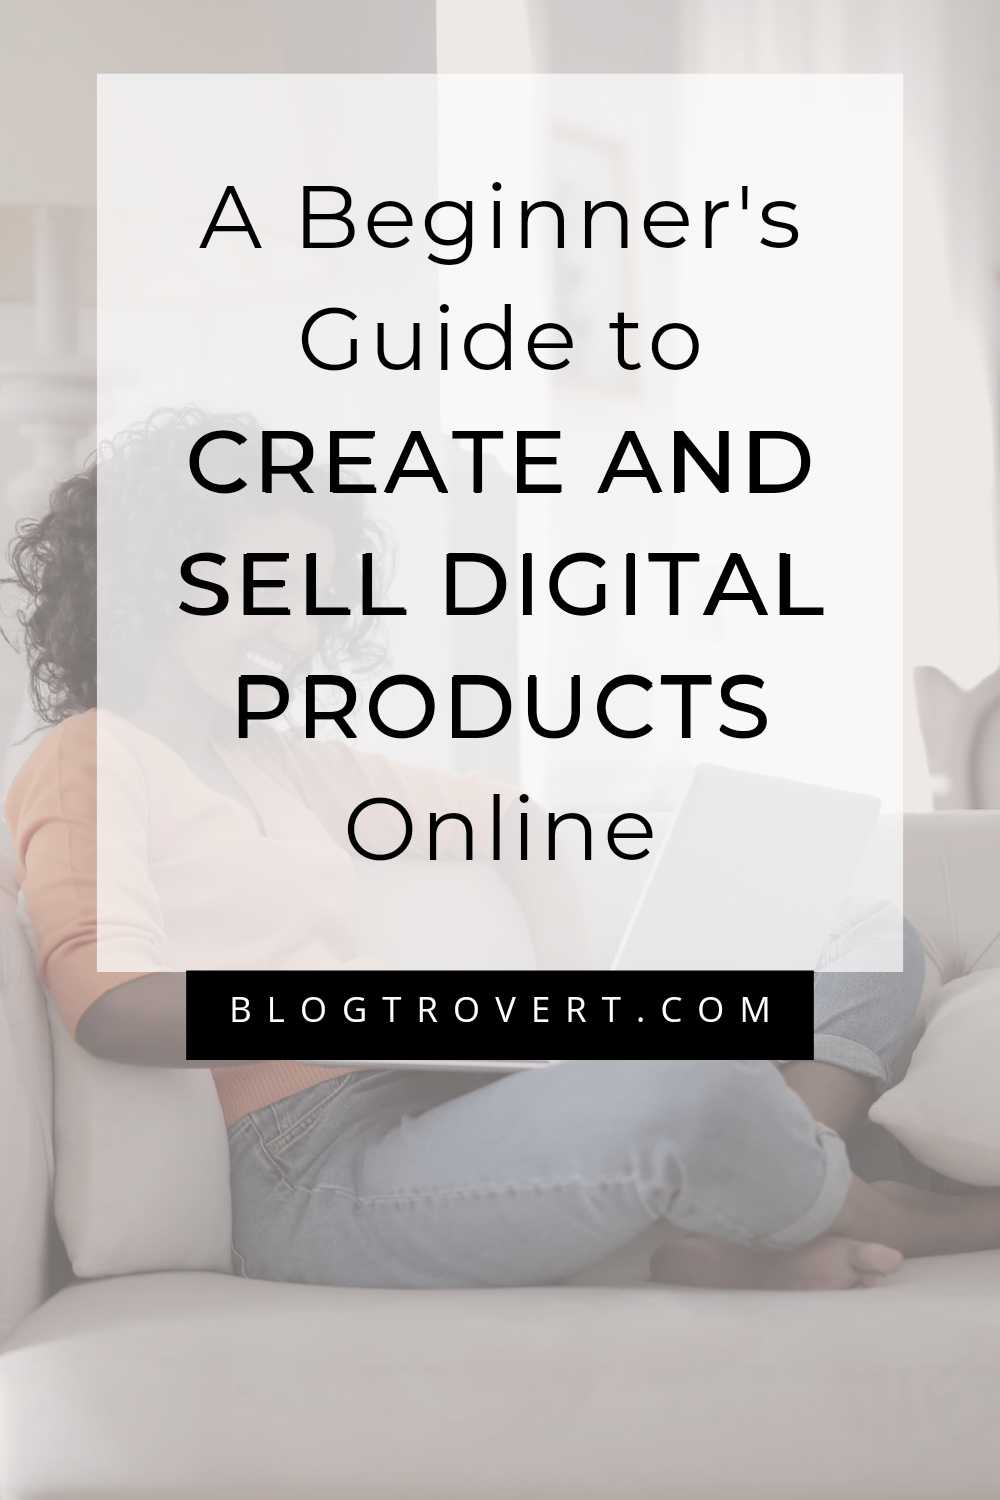 5 Of The Best Digital Products To Sell And Make Money Online 3